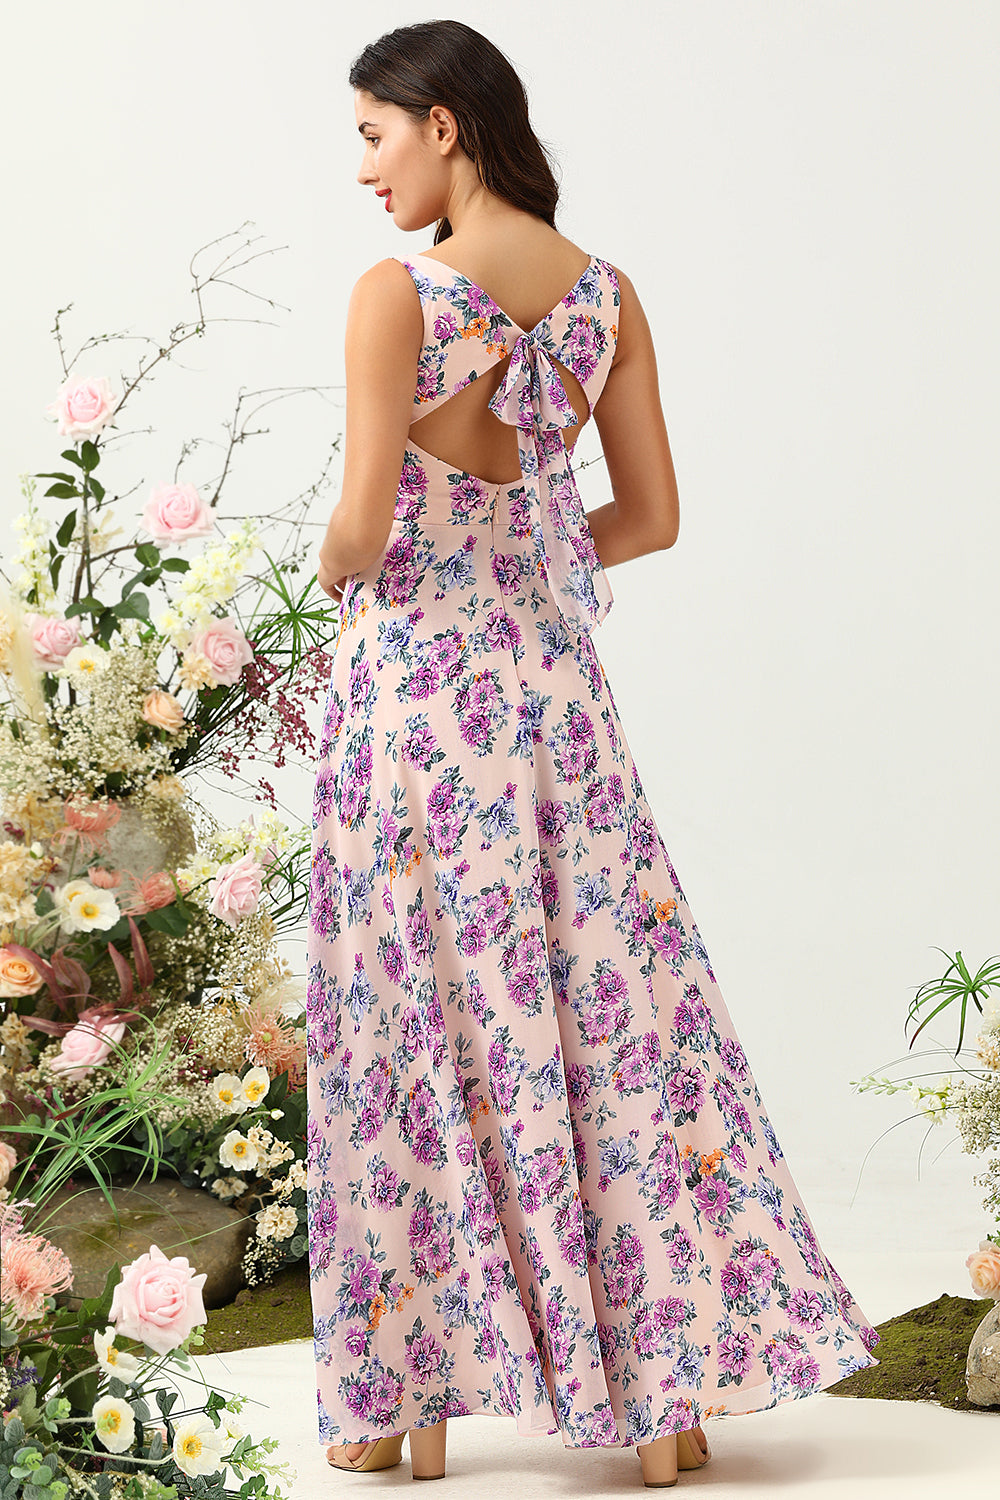 Pink A Line Square Neck Floral Printed Chiffon Wedding Party Dress with Open Back